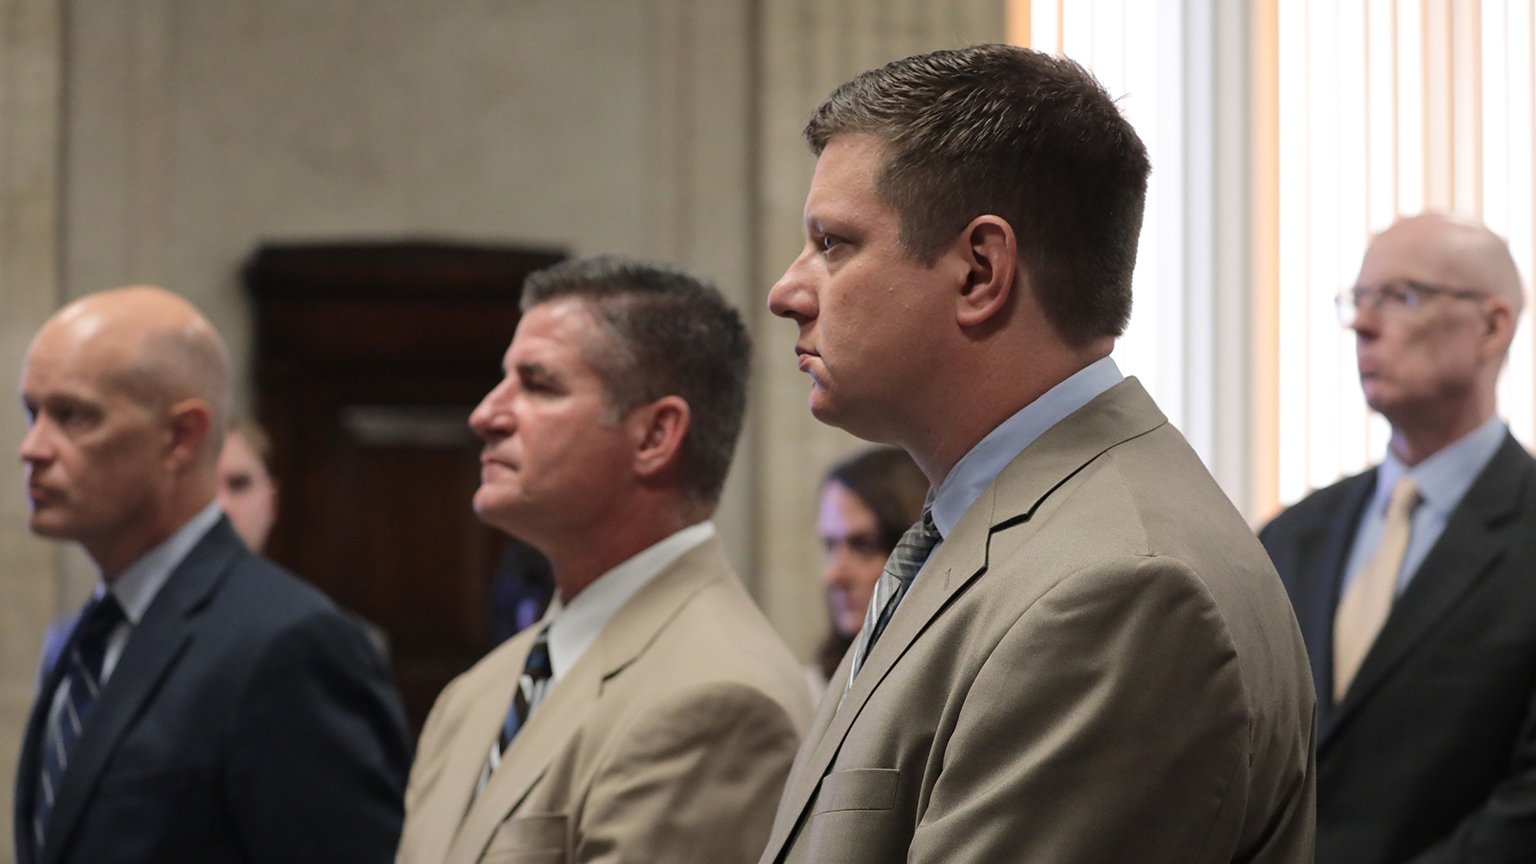 From left: Special prosecutor Joe McMahon, attorney Daniel Herbert and his client, Chicago police Officer Jason Van Dyke, attend a hearing on Sept. 4, 2018 concerning the shooting death of Laquan McDonald. (Antonio Perez / Pool / Chicago Tribune)